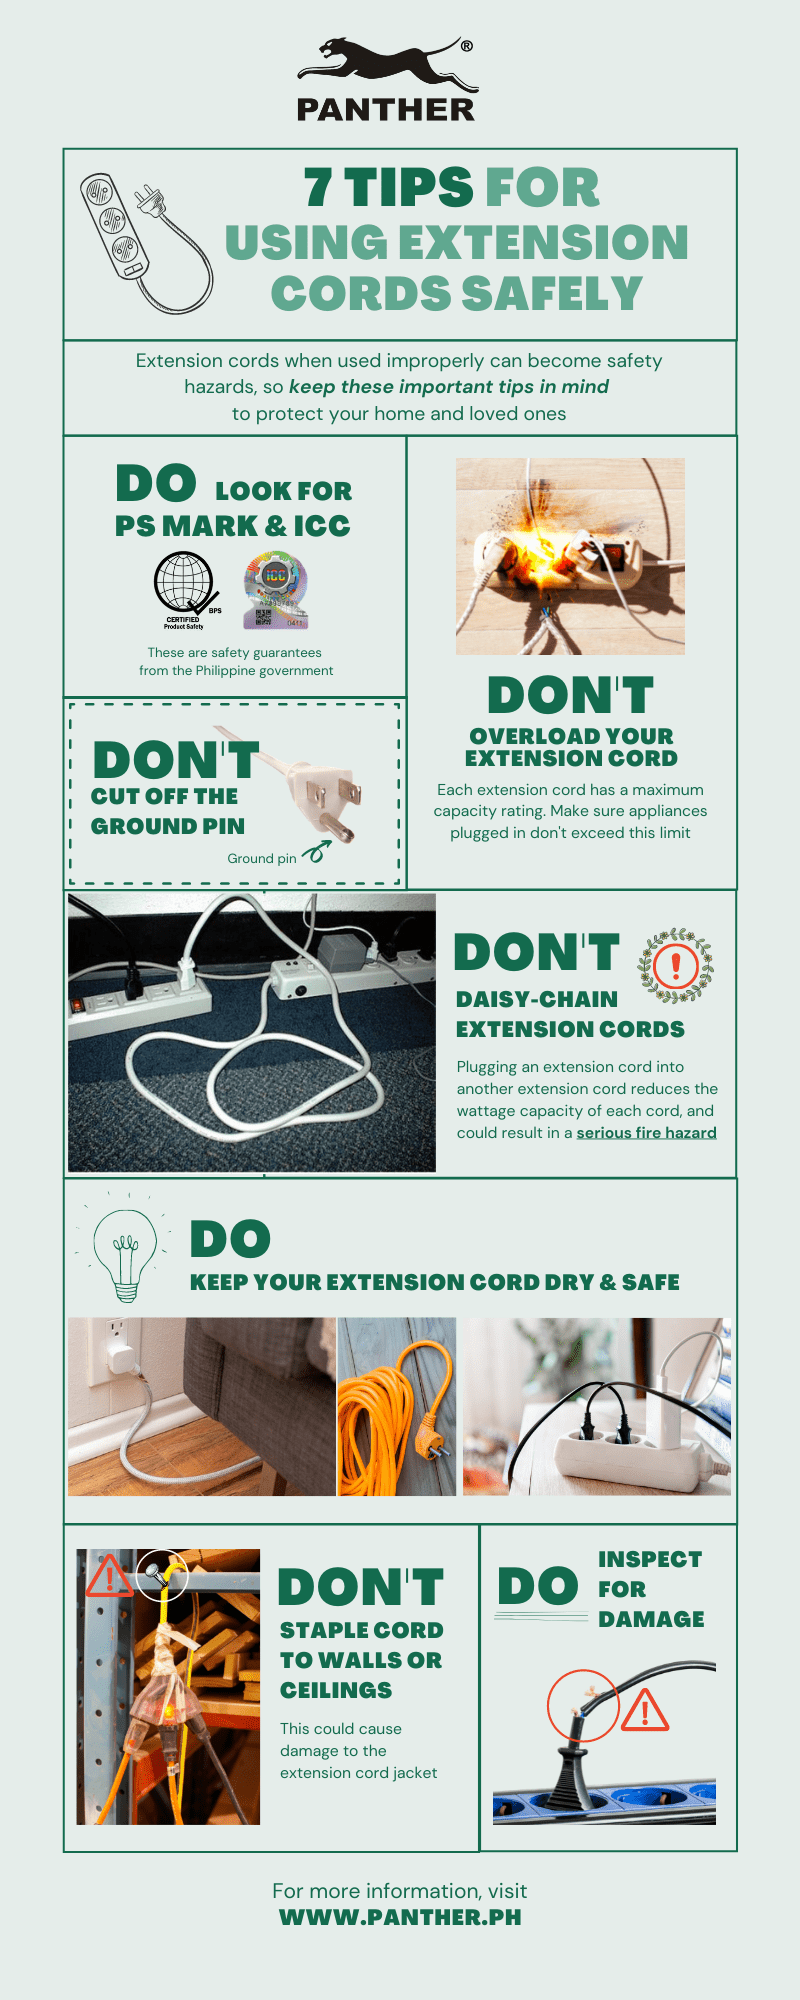 Panther-Extension-Cord-Tips-on-How-to-Use-Cords-Safely